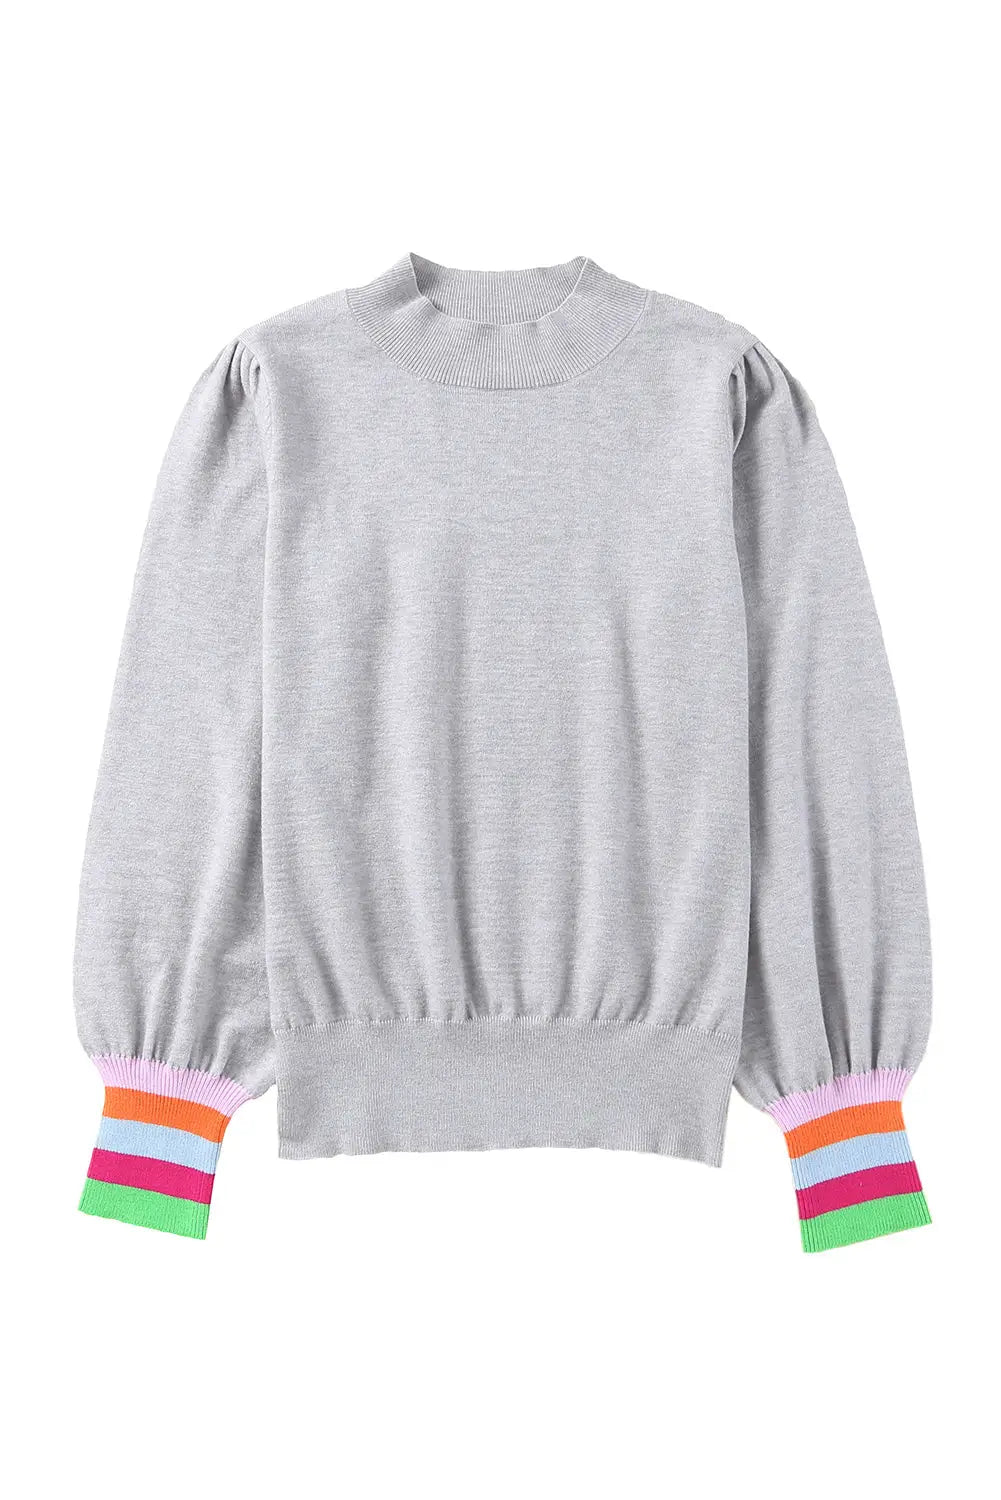 Gray crew neck colorful striped cuffs puff sleeves sweater - sweaters & cardigans